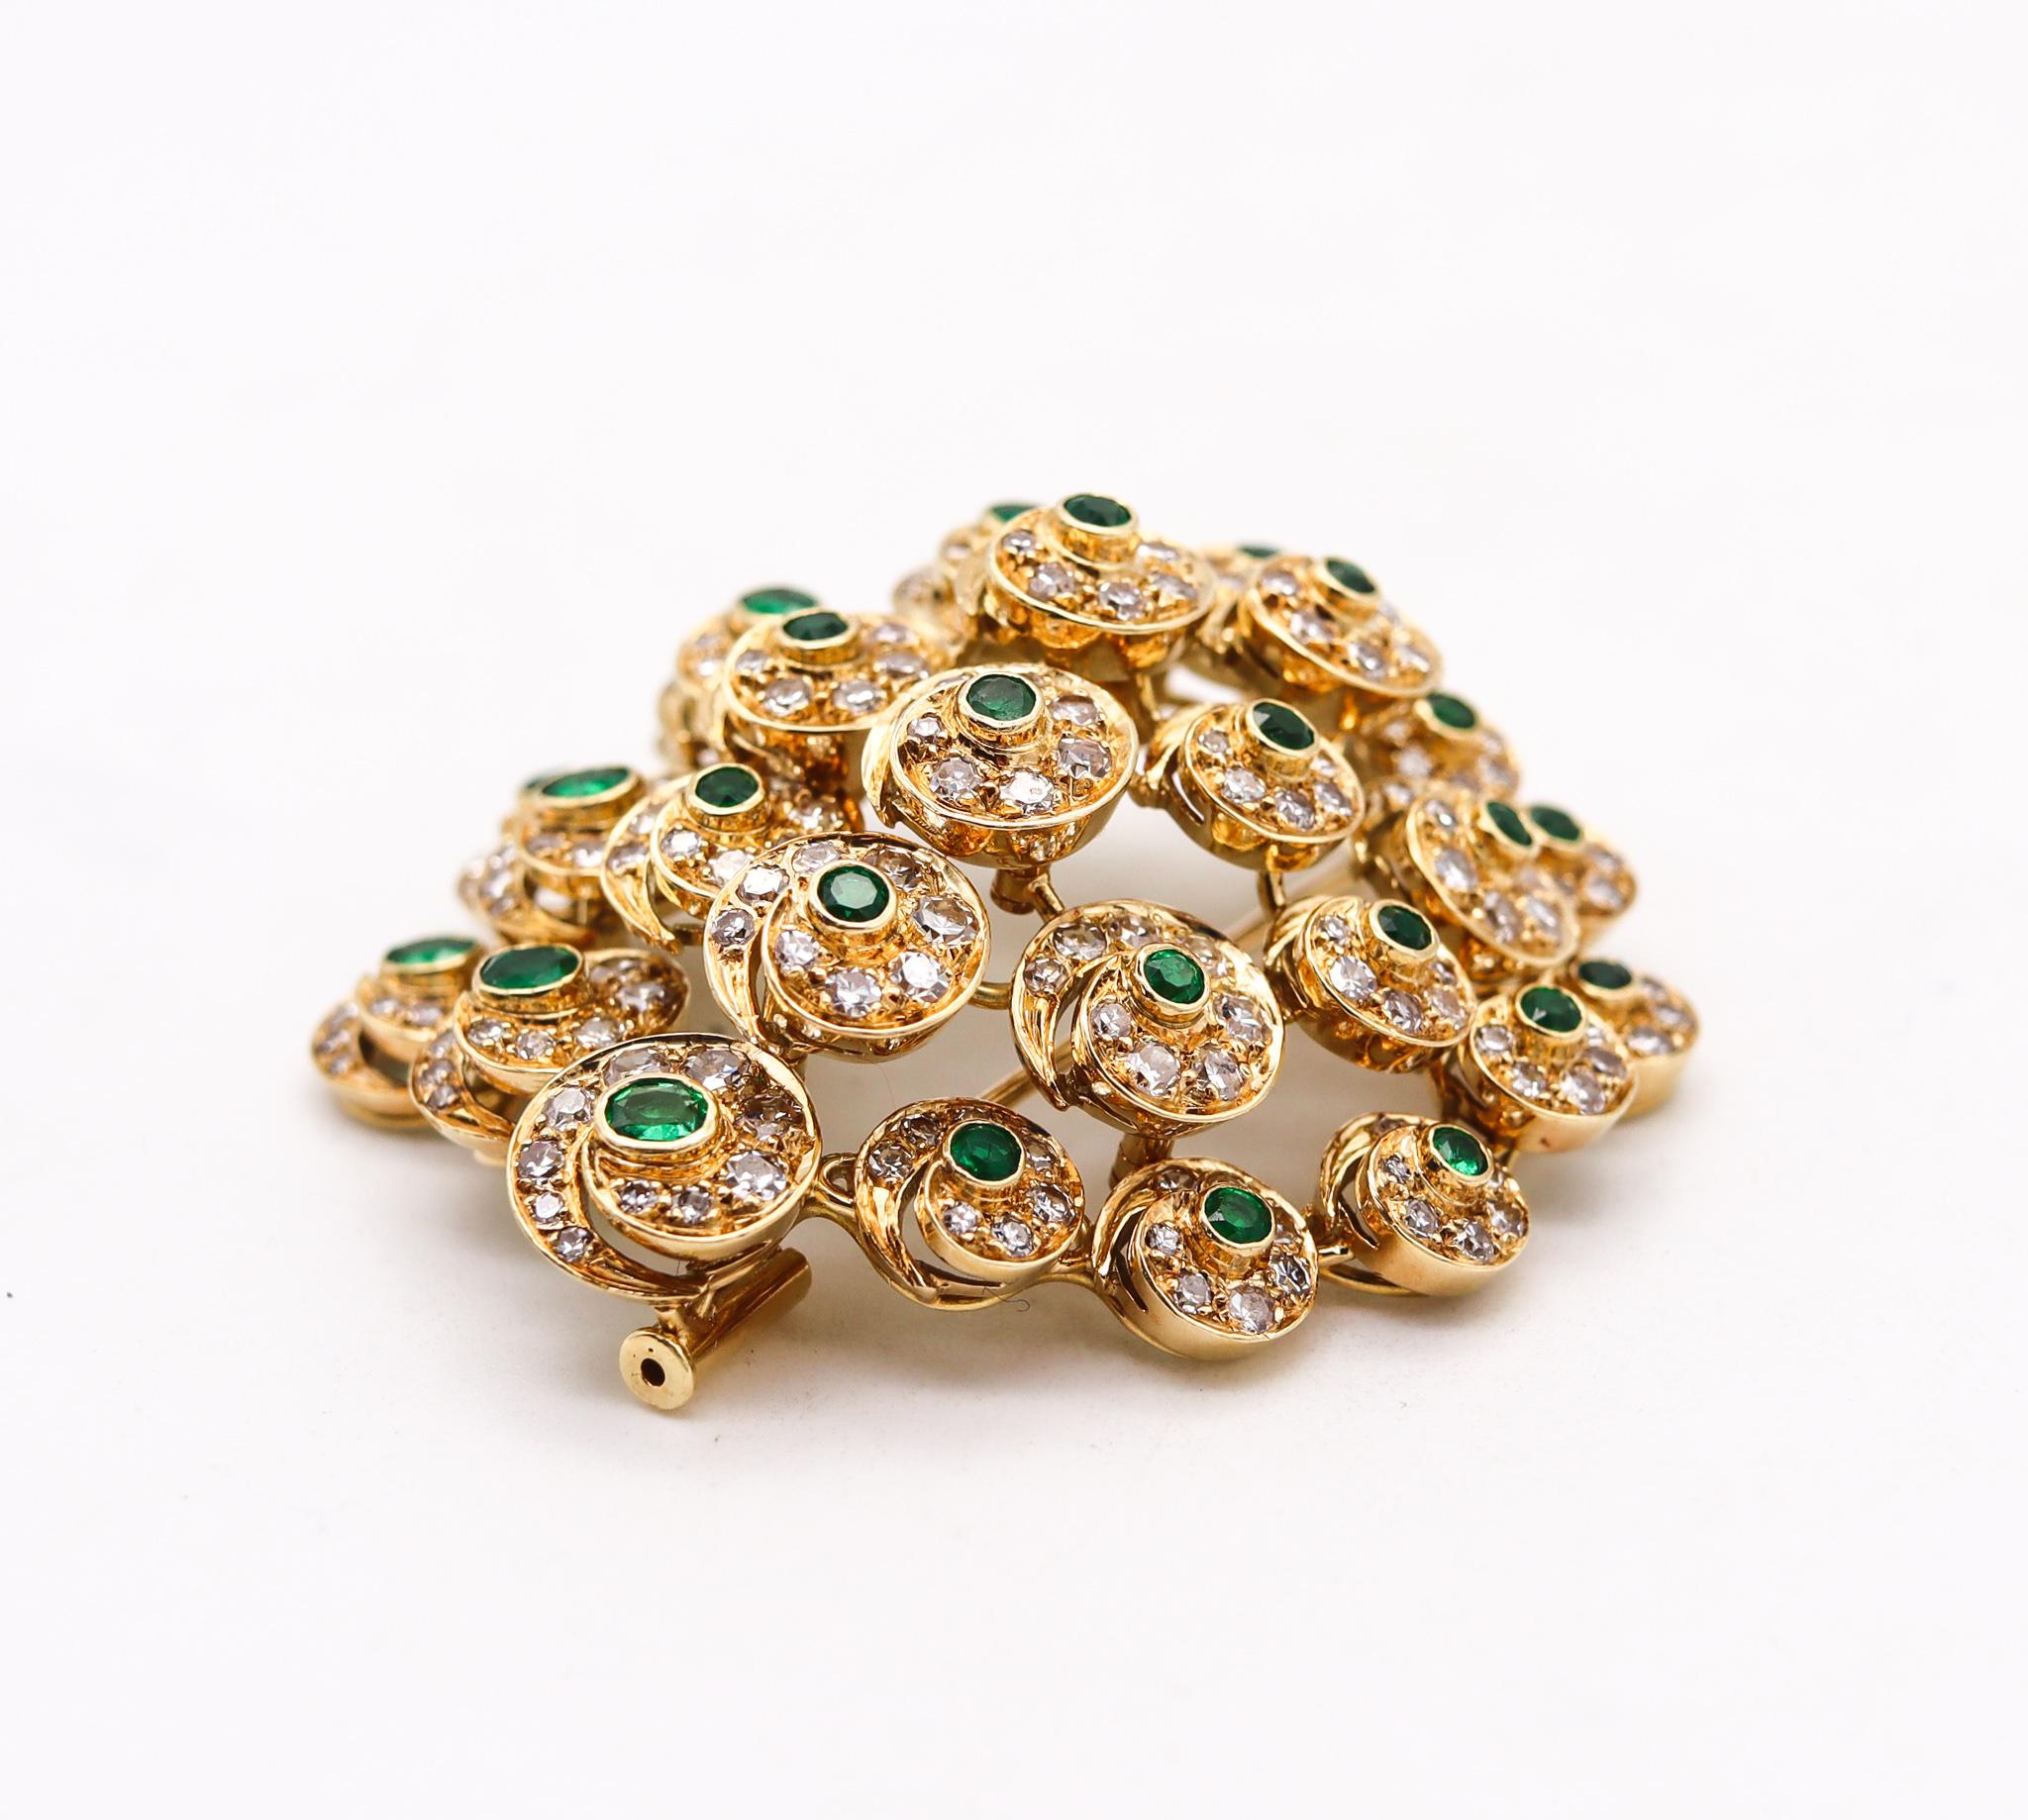 Modernist Convertible Pendant Brooch in 18Kt Gold with 10.48 Cts in Diamonds and Emeralds For Sale